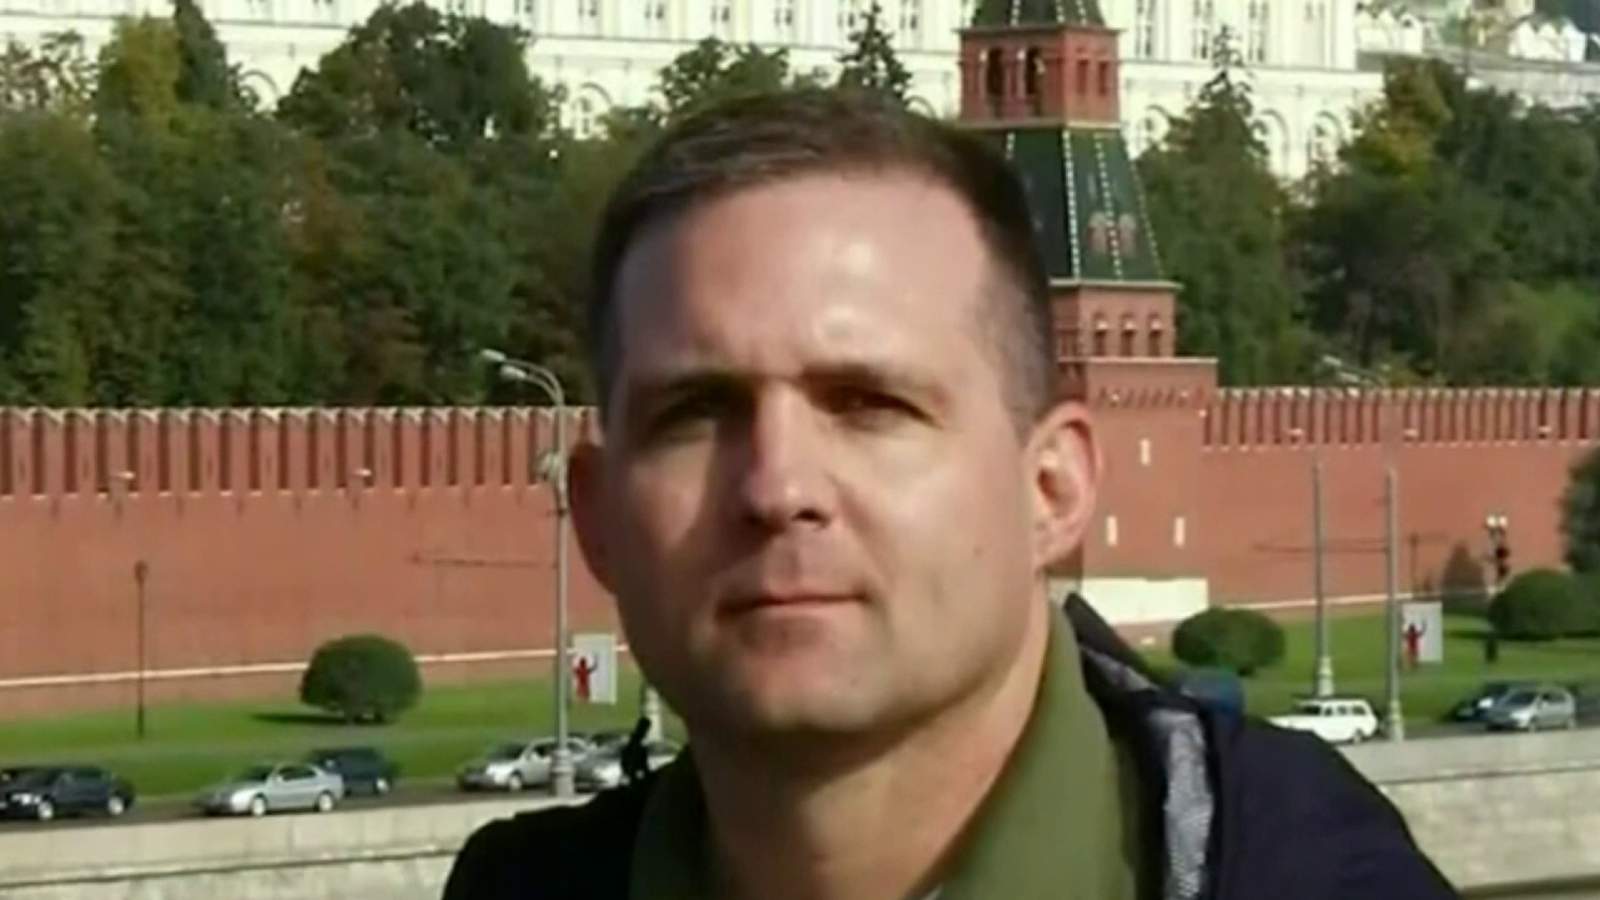 Michigan man being detained in Russia undergoes emergency surgery, family says